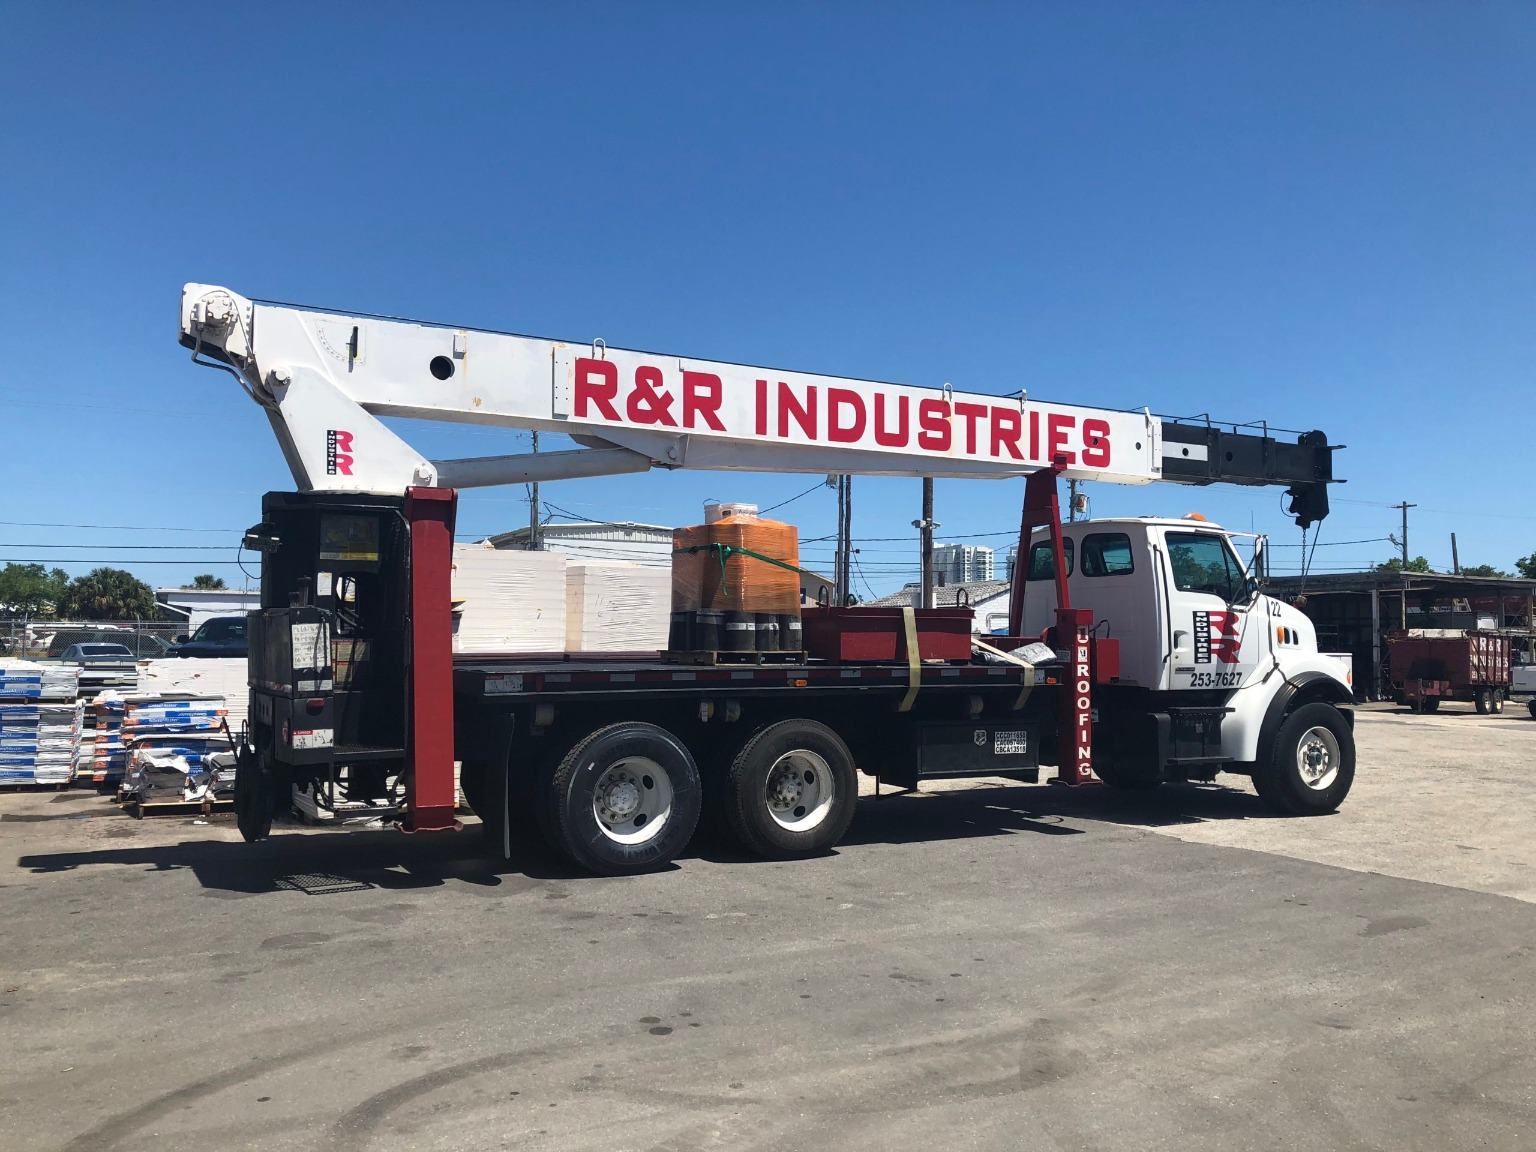 A Roofing Database Made by a Roofing Company: R&R Industries' Success With Ragic Icon